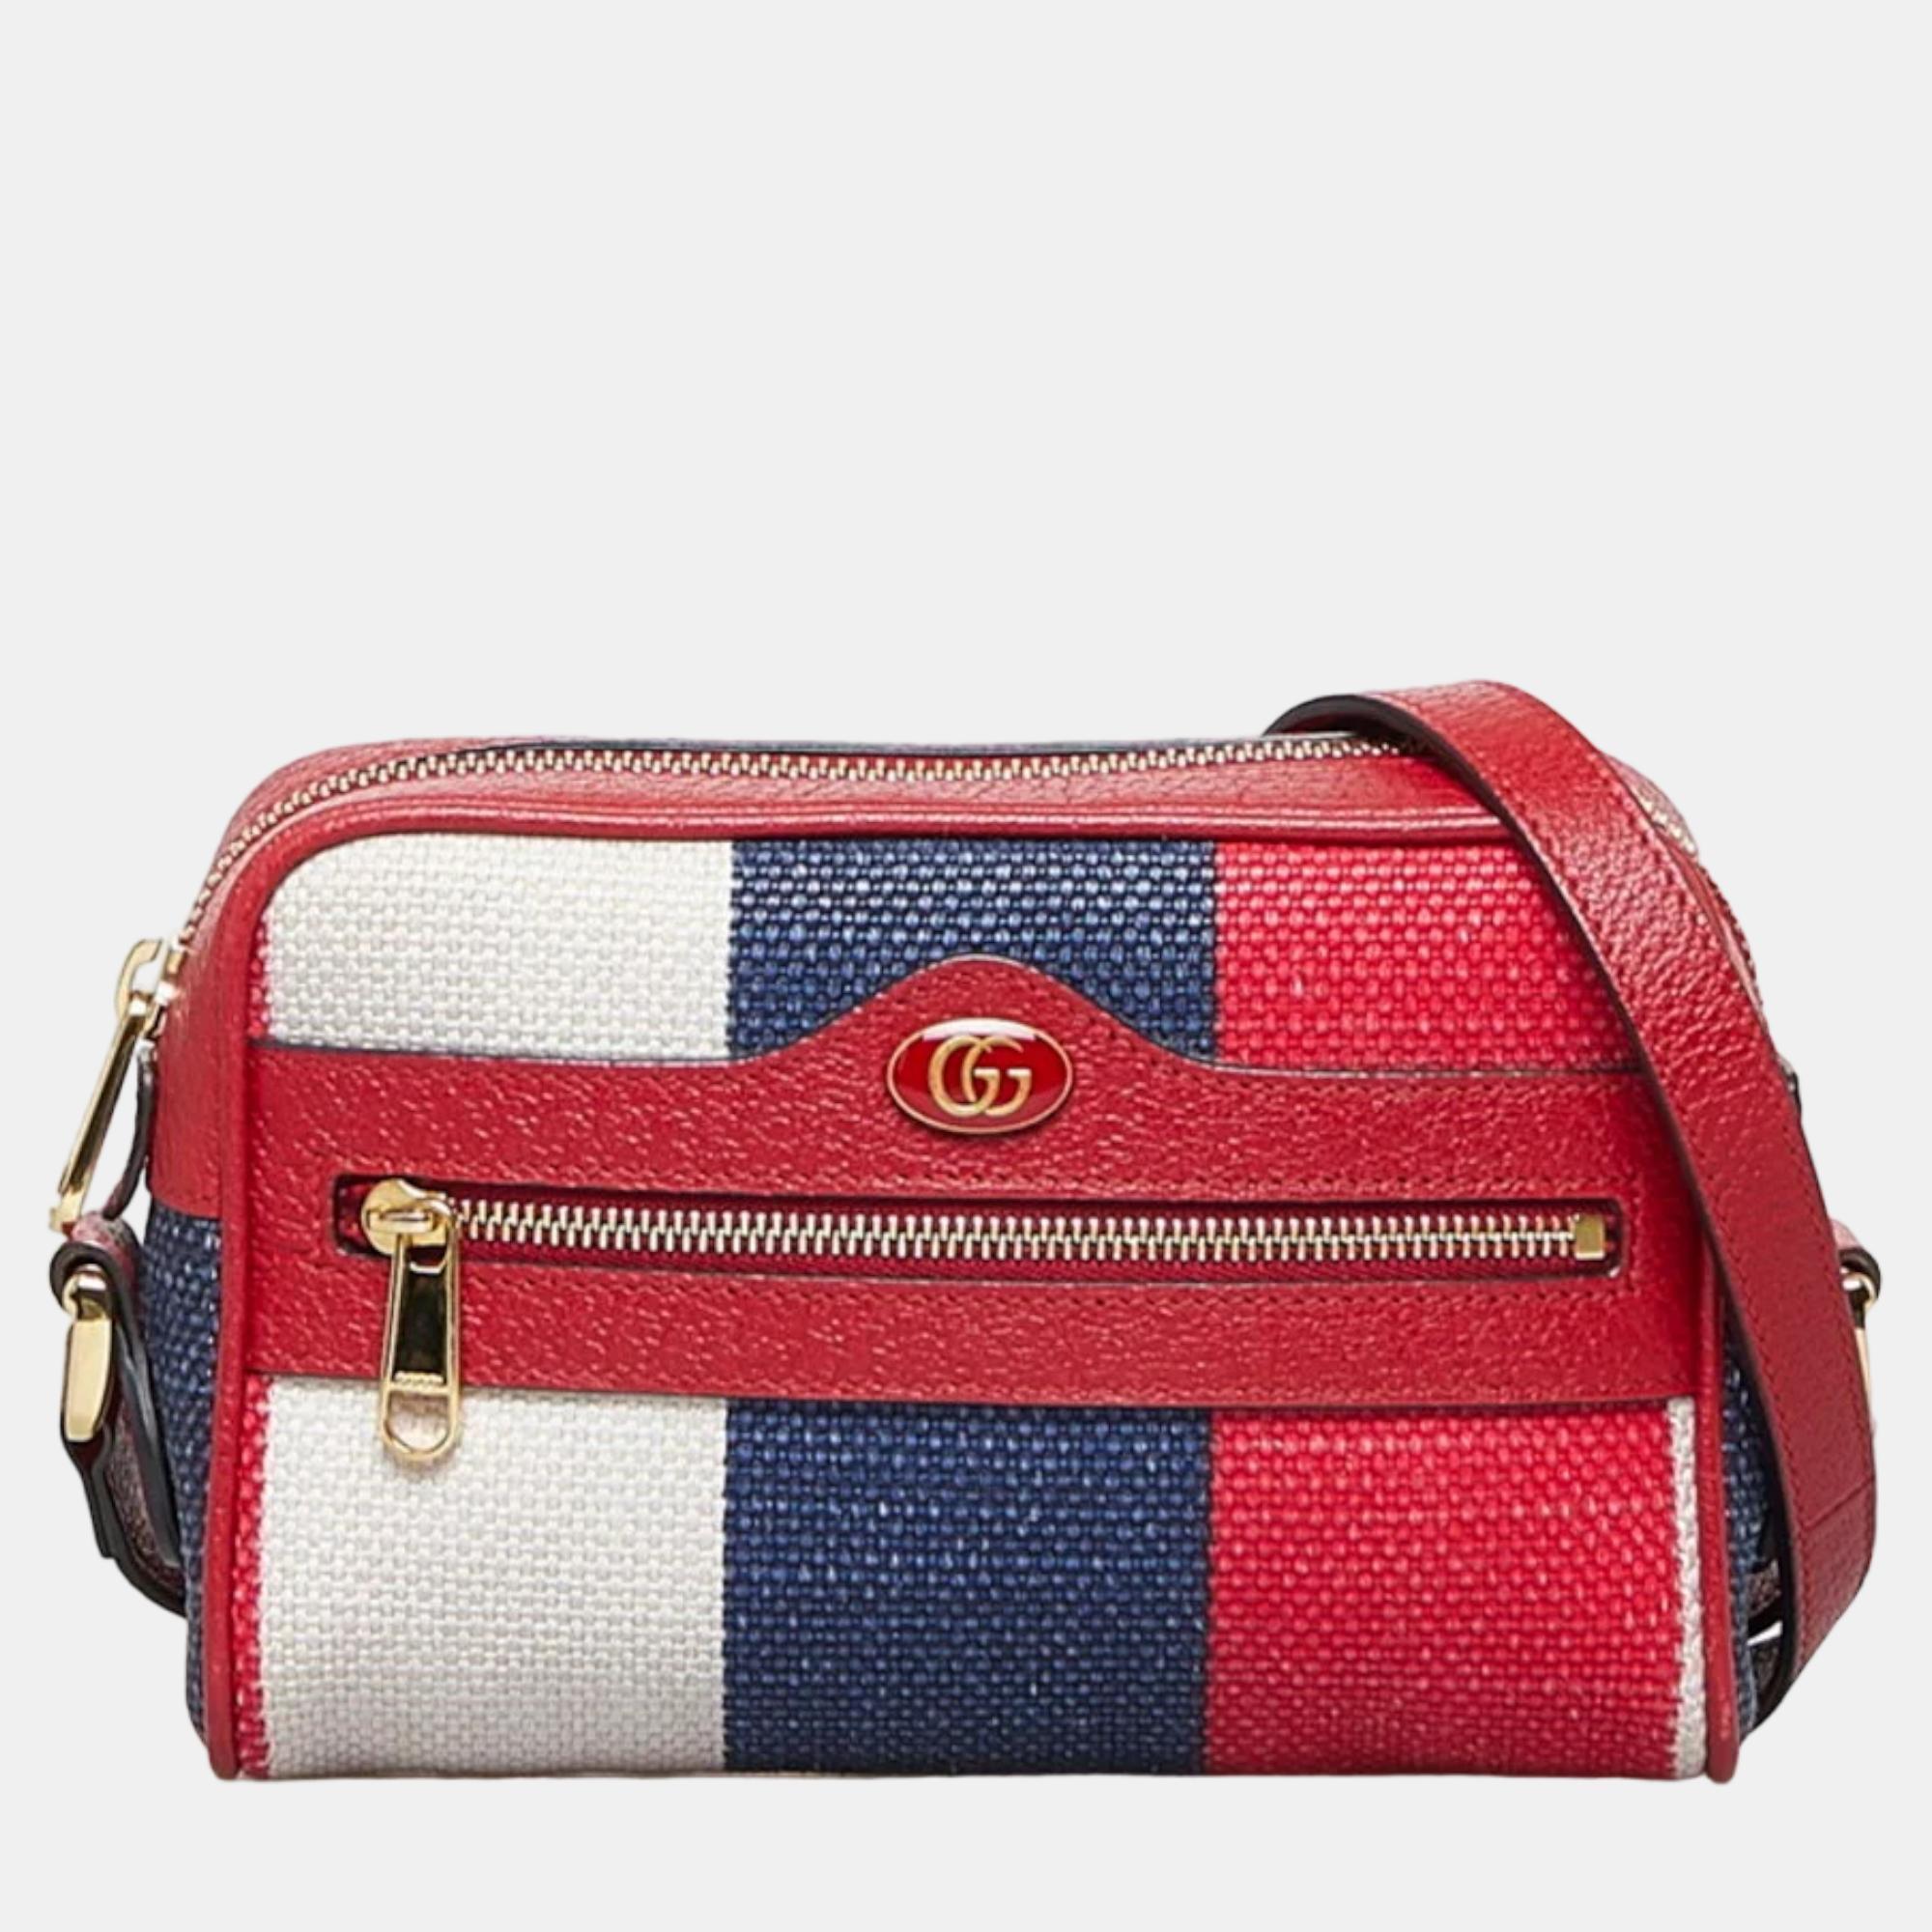 This Gucci bag is an example of the brands fine designs that are skillfully crafted to project a classic charm. It is a functional creation with an elevating appeal.